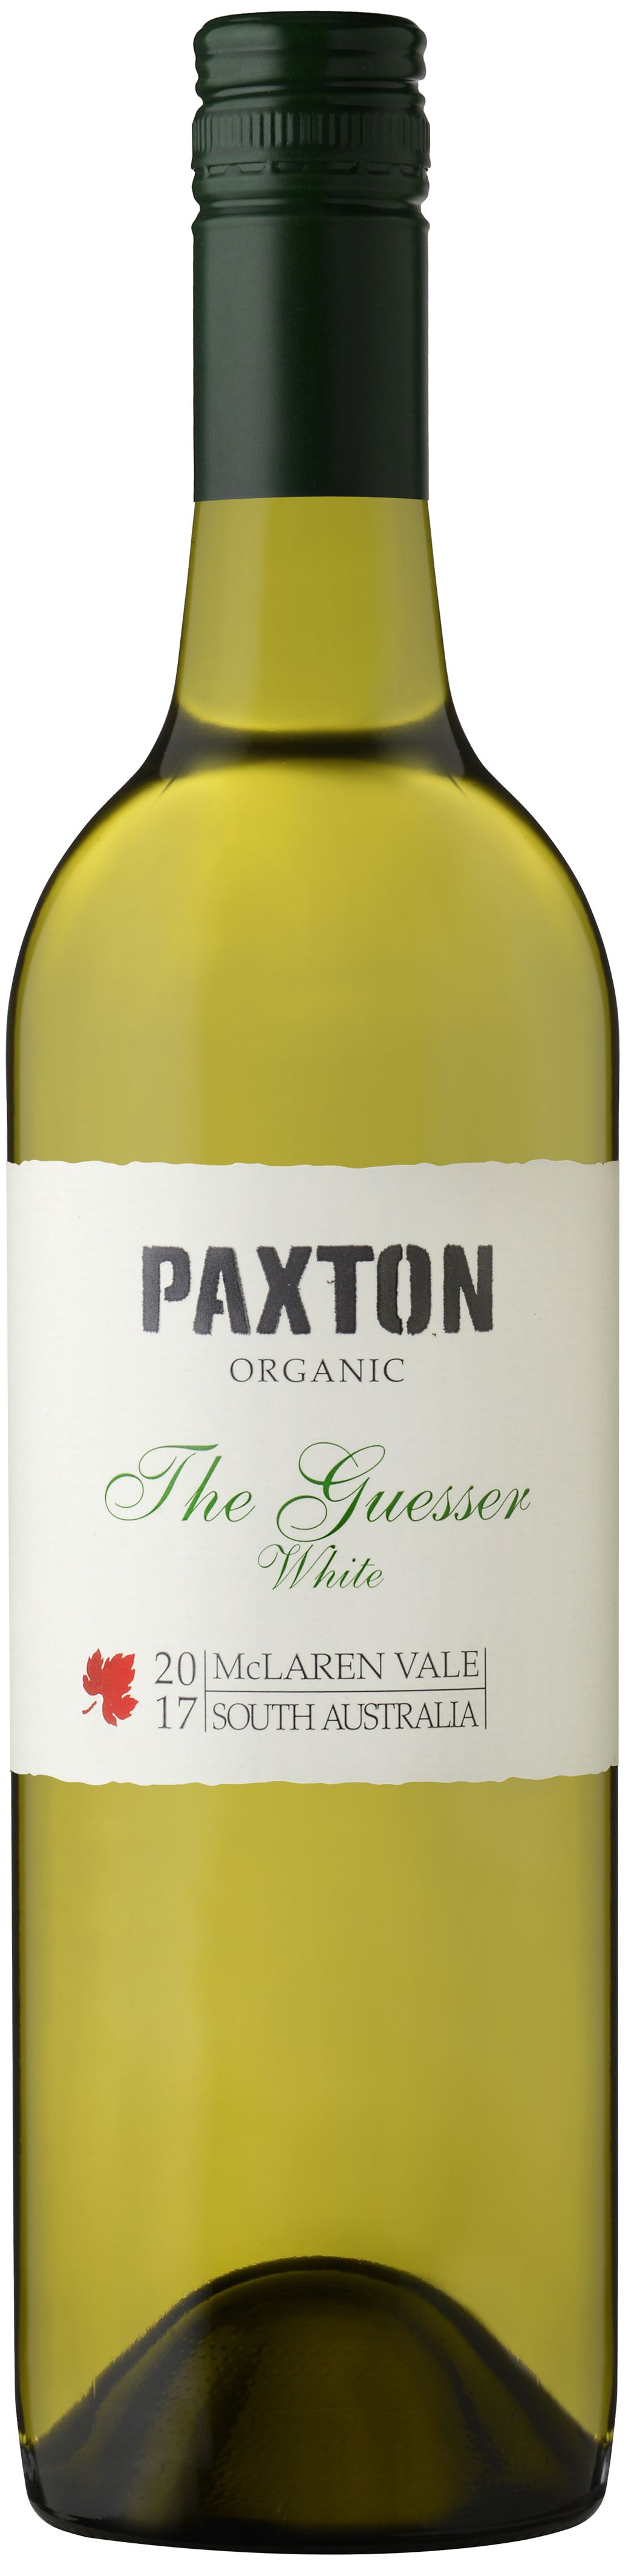 Paxton, The Guesser Organic White, 2017